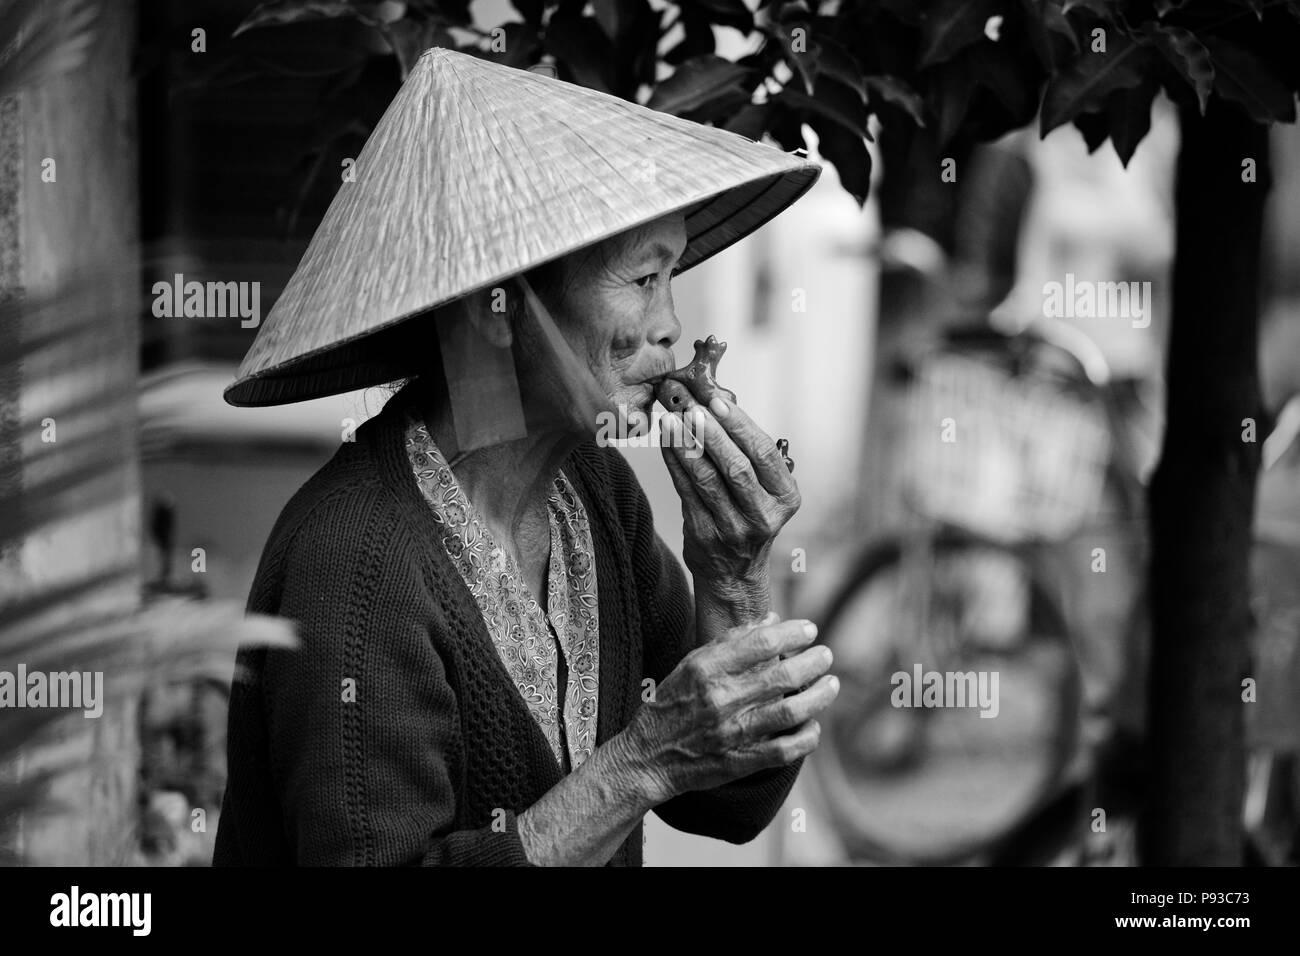 An elderly Vietnamese woman plays a OCARINA on the streets of HOI AN - CENTRAL VIETNAM Stock Photo